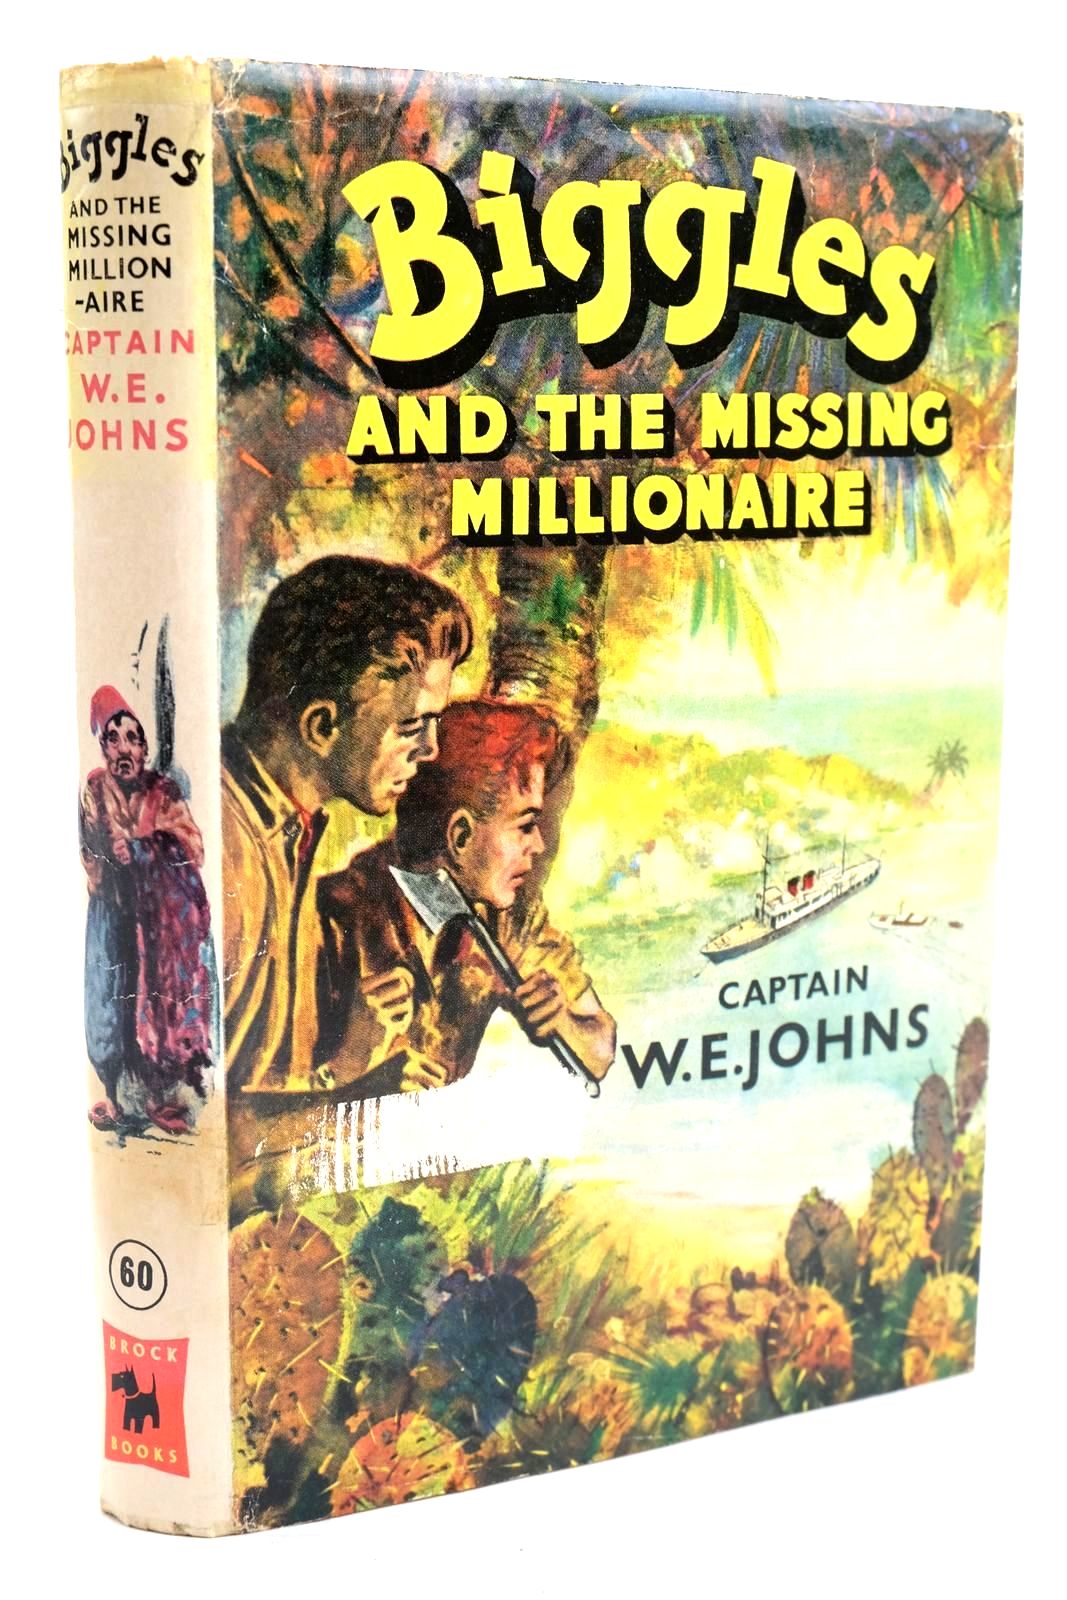 Photo of BIGGLES AND THE MISSING MILLIONAIRE written by Johns, W.E. illustrated by Stead, Leslie published by Brockhampton Press Ltd. (STOCK CODE: 1319726)  for sale by Stella & Rose's Books